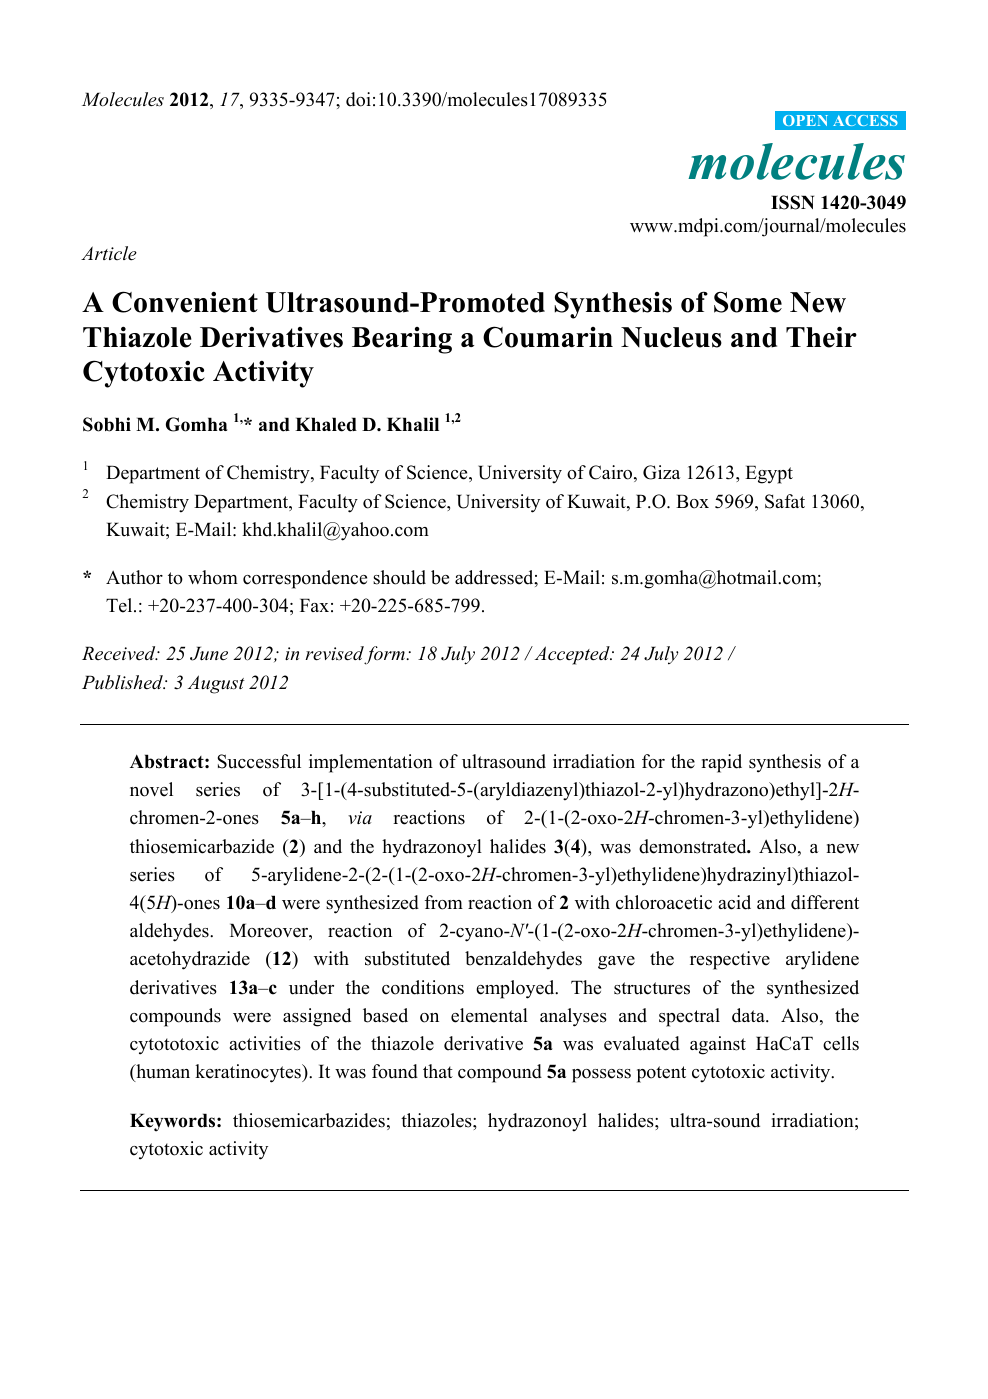 A Convenient Ultrasound Promoted Synthesis Of Some New Thiazole Derivatives Bearing A Coumarin Nucleus And Their Cytotoxic Activity Topic Of Research Paper In Chemical Sciences Download Scholarly Article Pdf And Read For